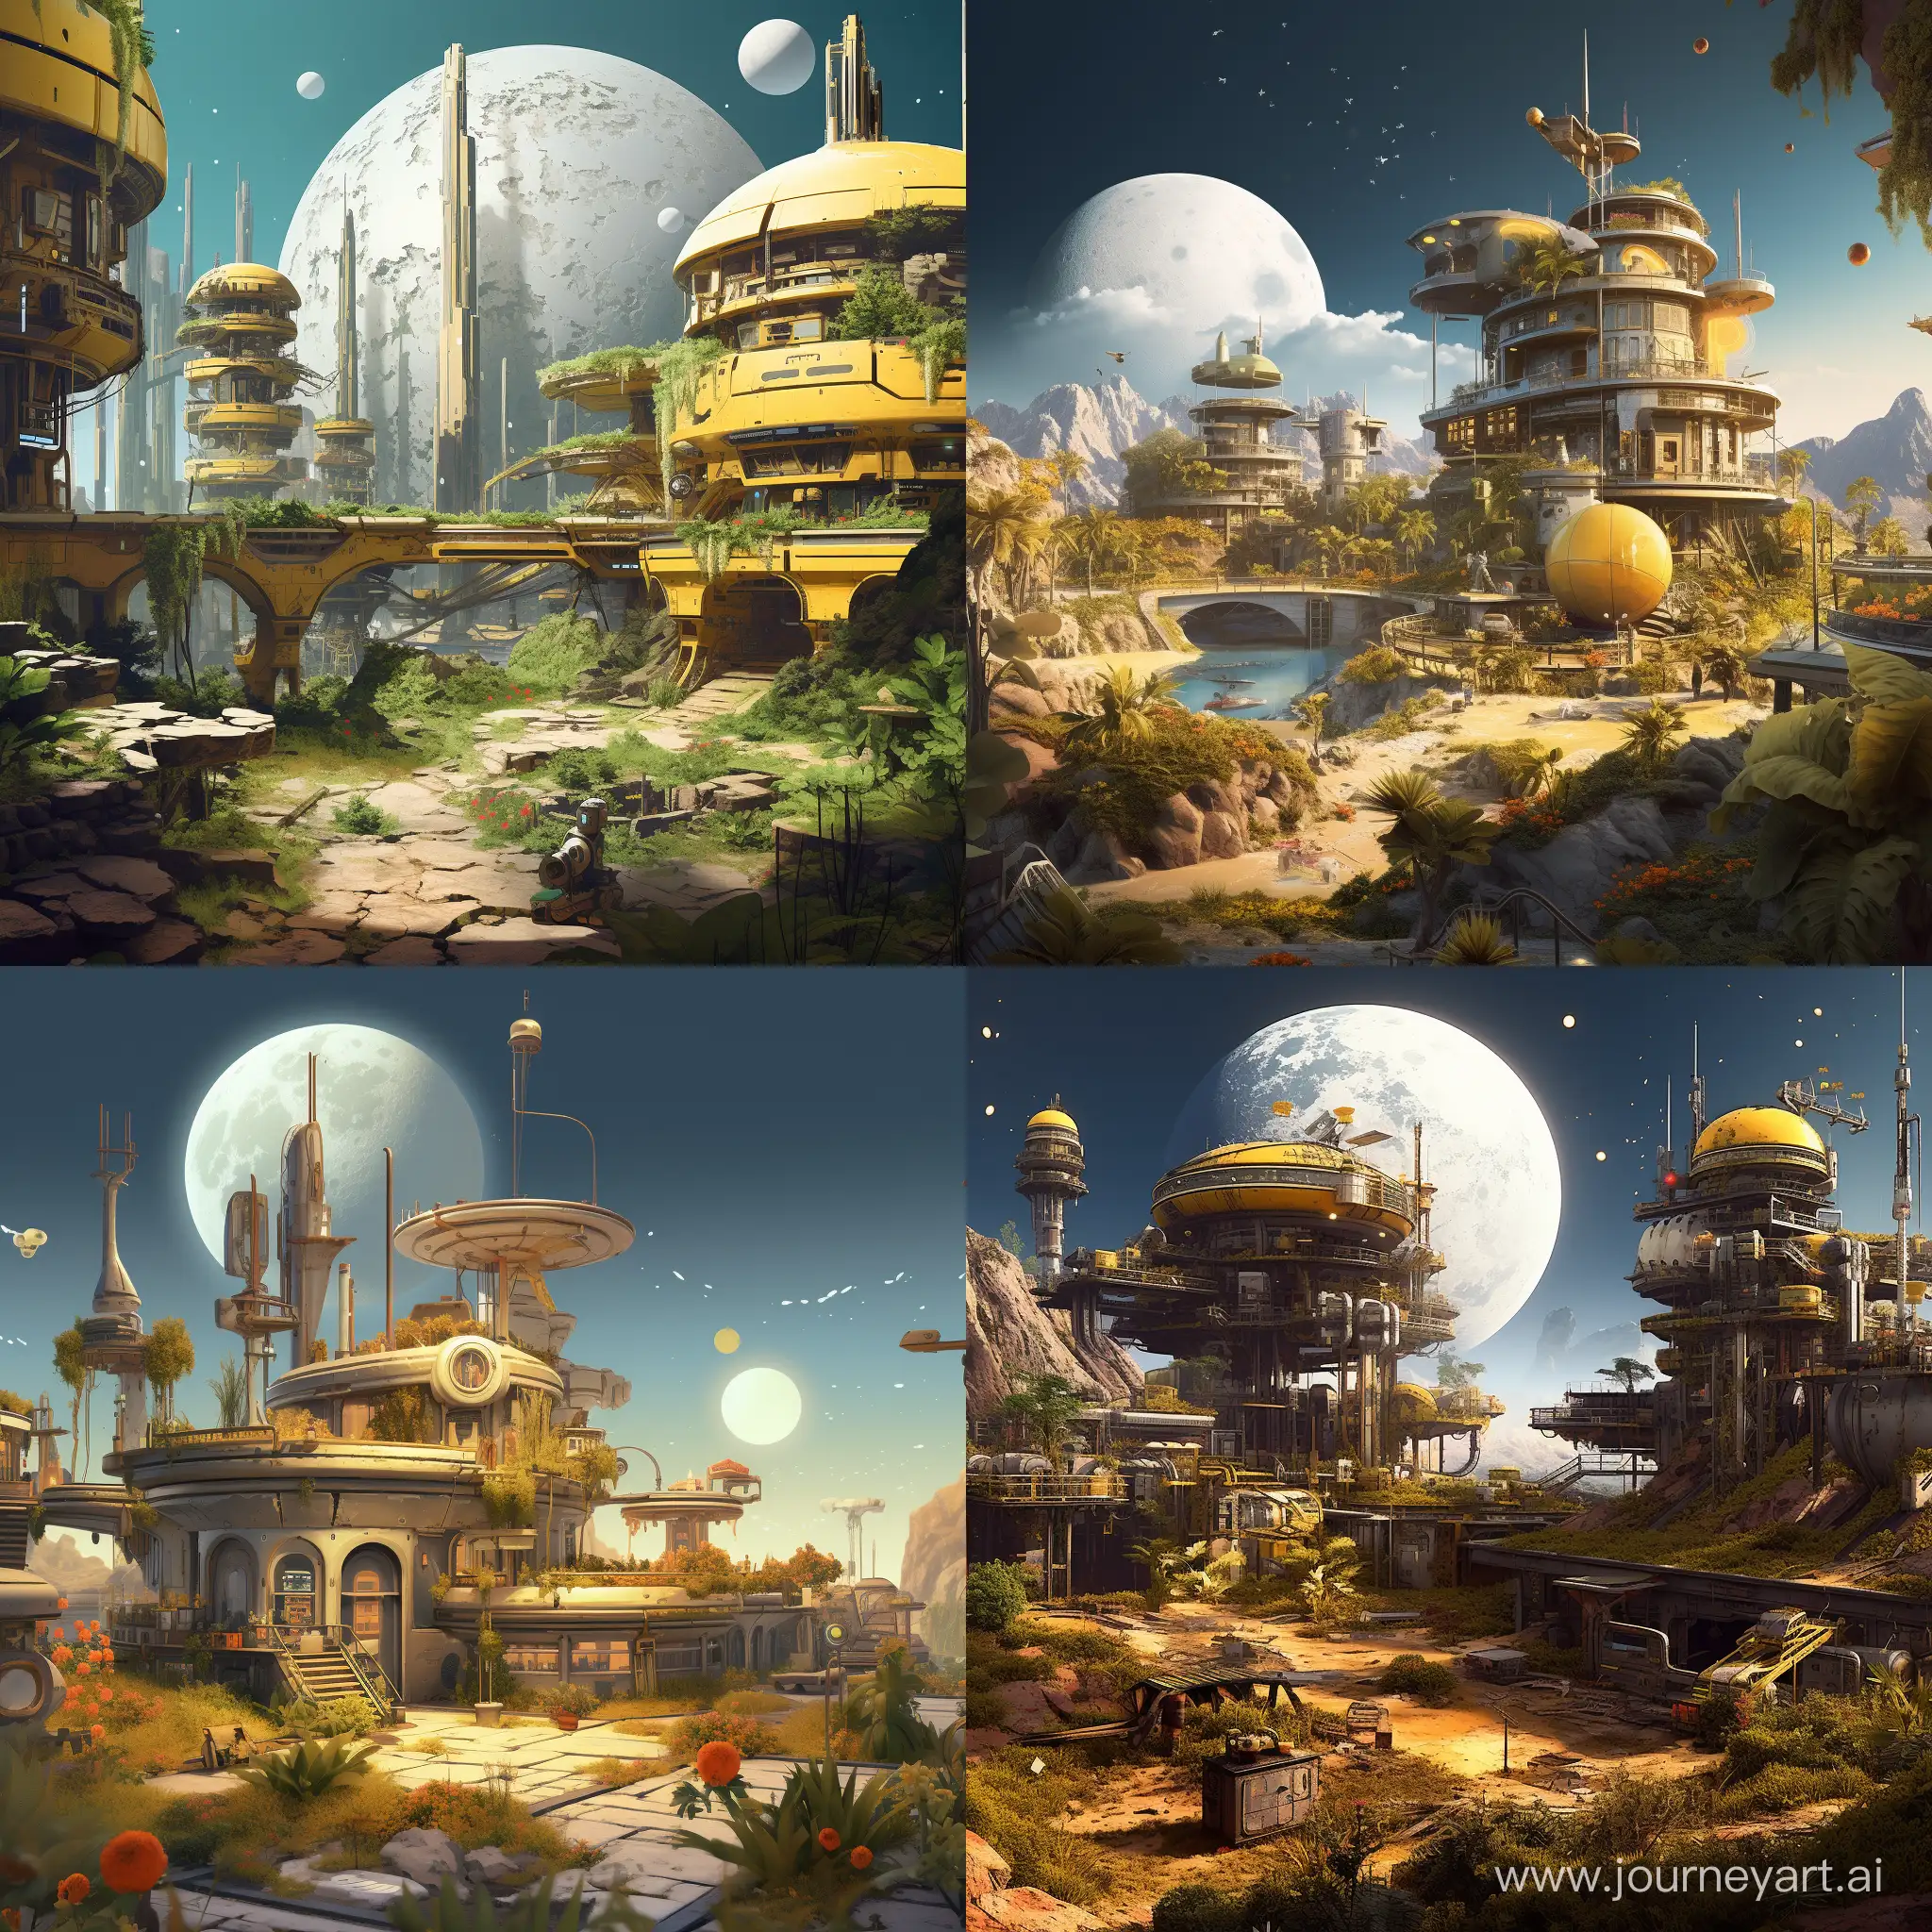 Scenery. A small yellow moon with a small space outpost on it. There are spaceships on the landing pads, and to the left you can see an old-fashioned building in the retro futurist style. Множество растений вокруг окутывают старые здания и брошенные корабли.